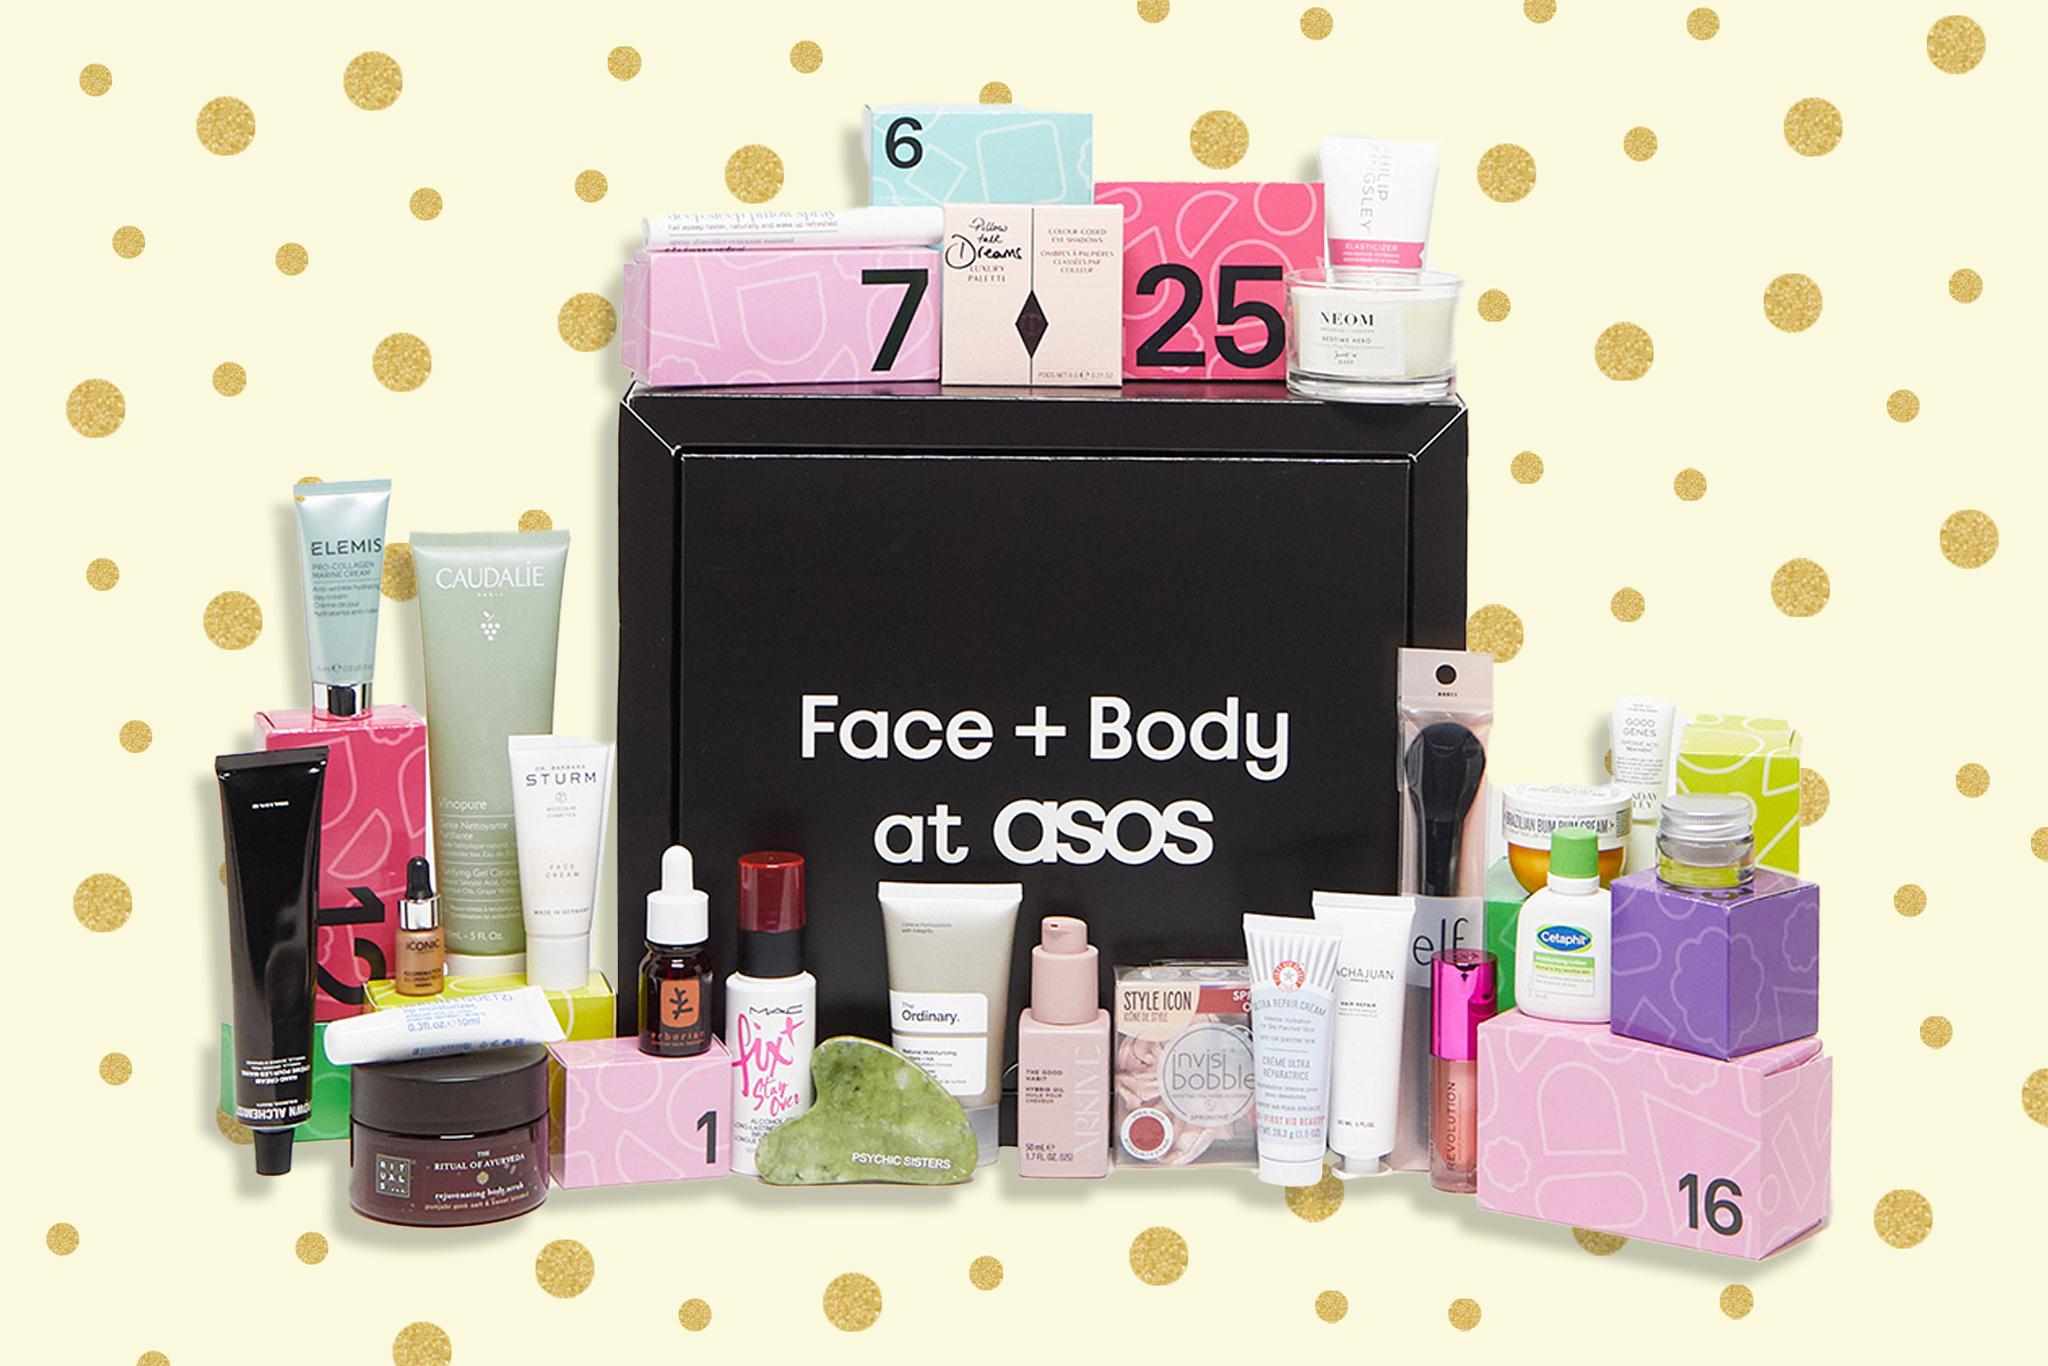 Asos’s beauty advent calendar is sure to offer a stellar 25-day countdown